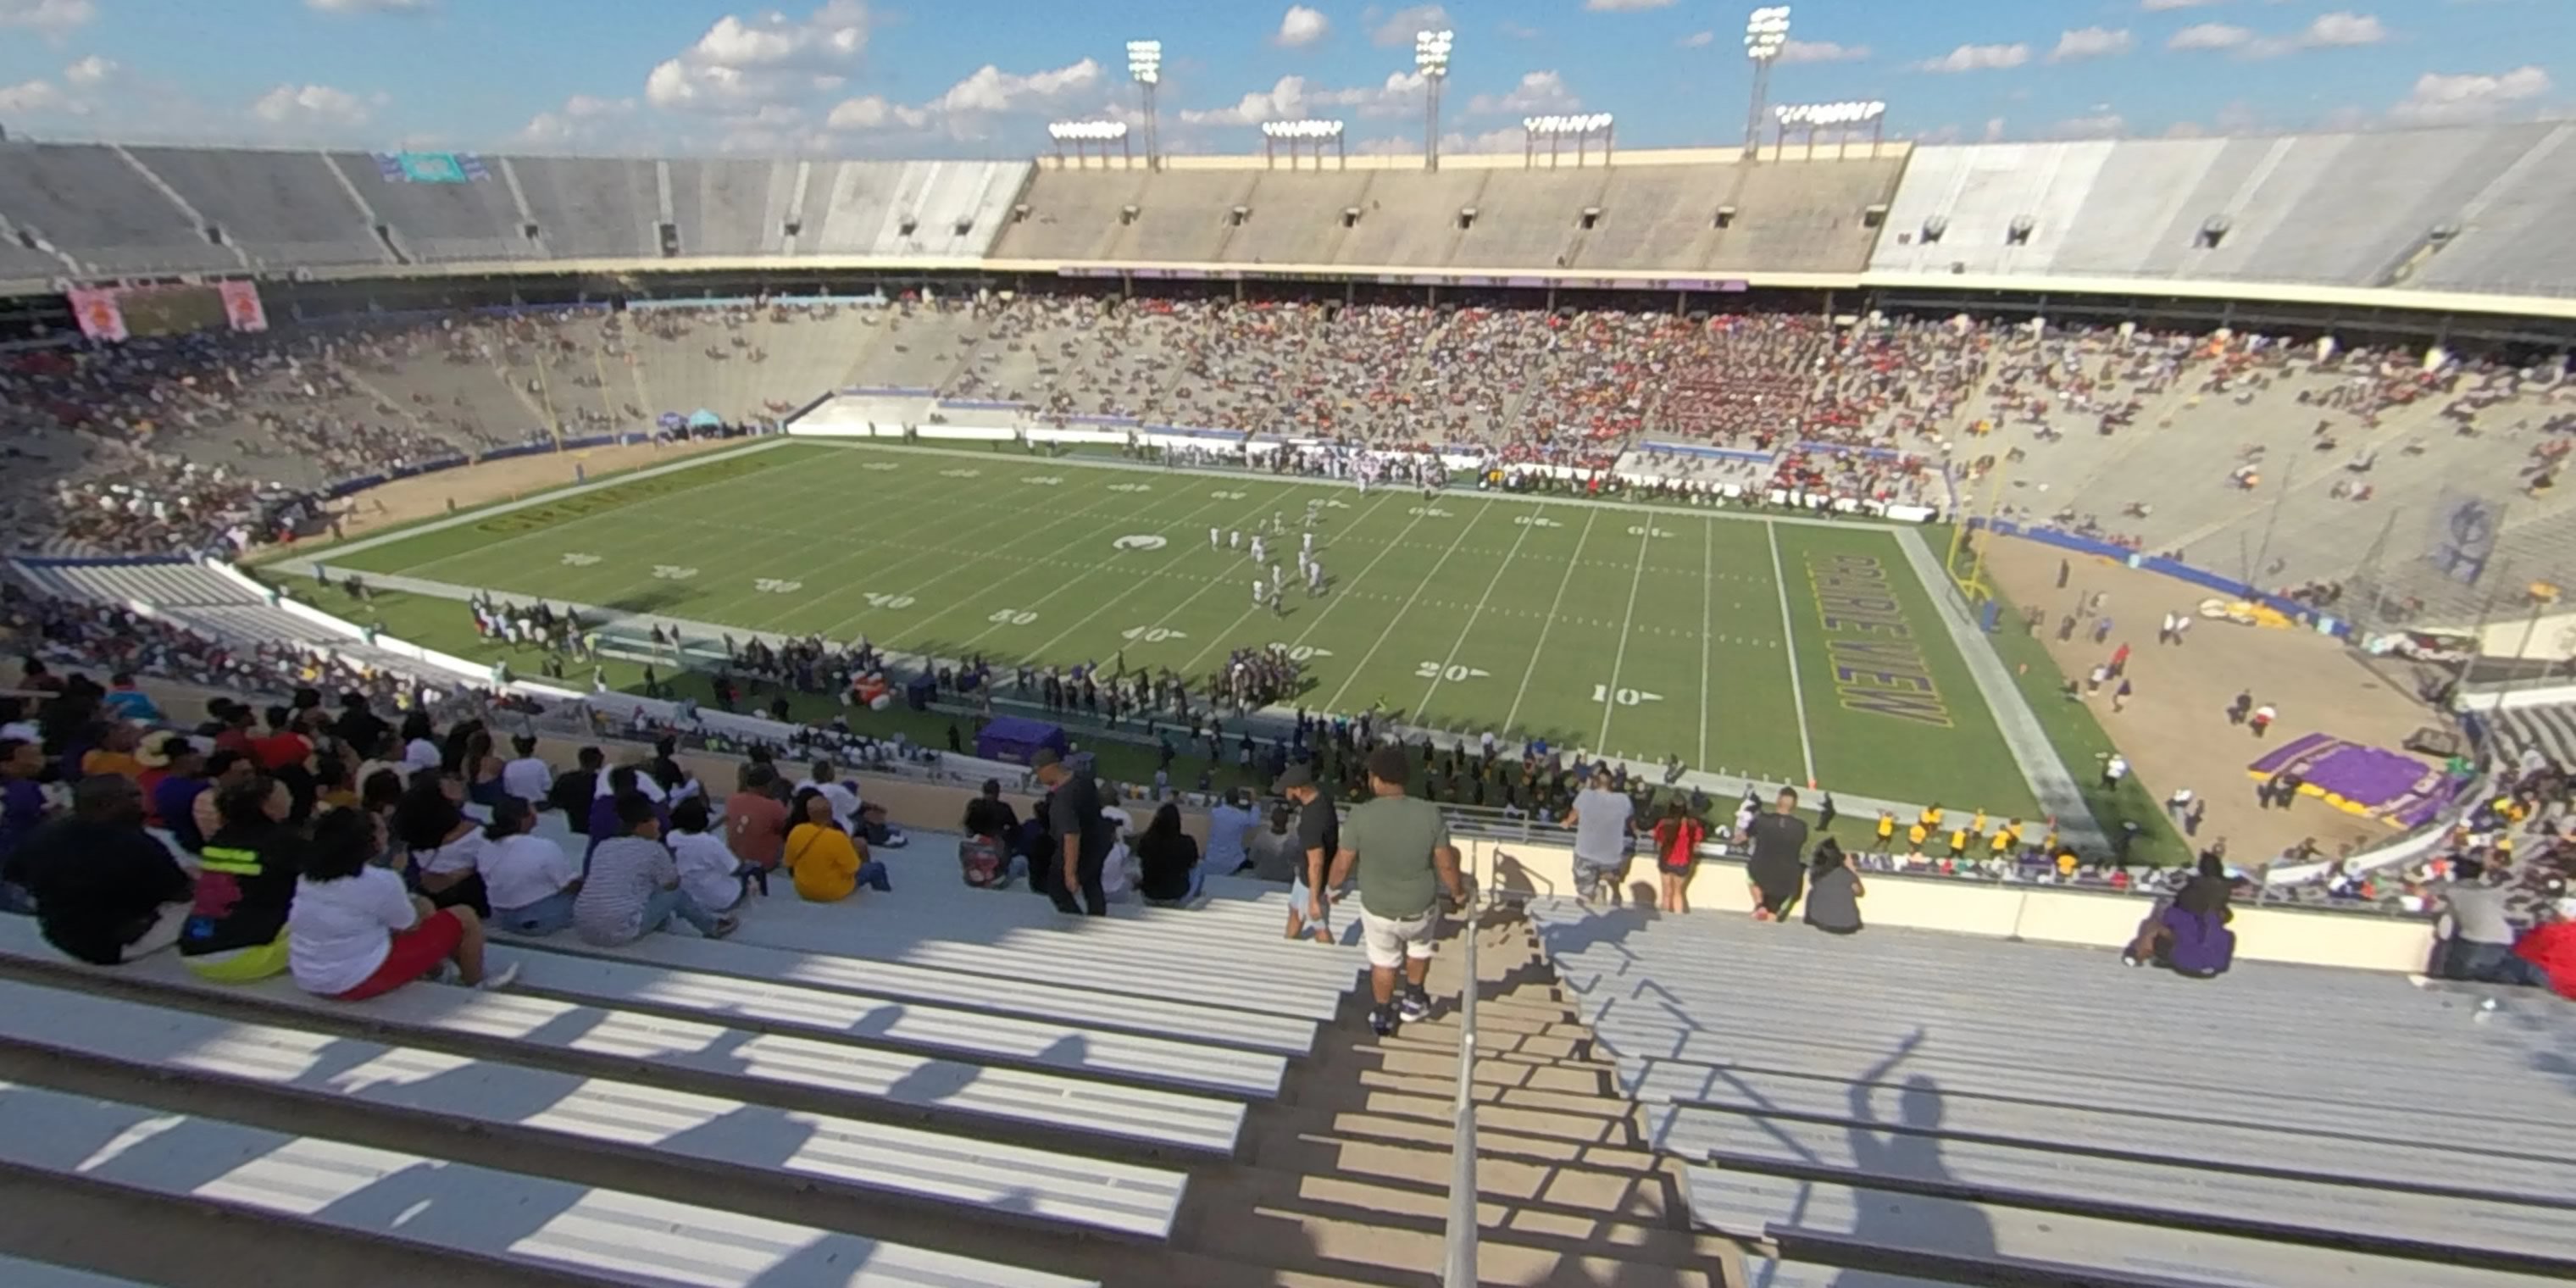 section 103 panoramic seat view  - cotton bowl